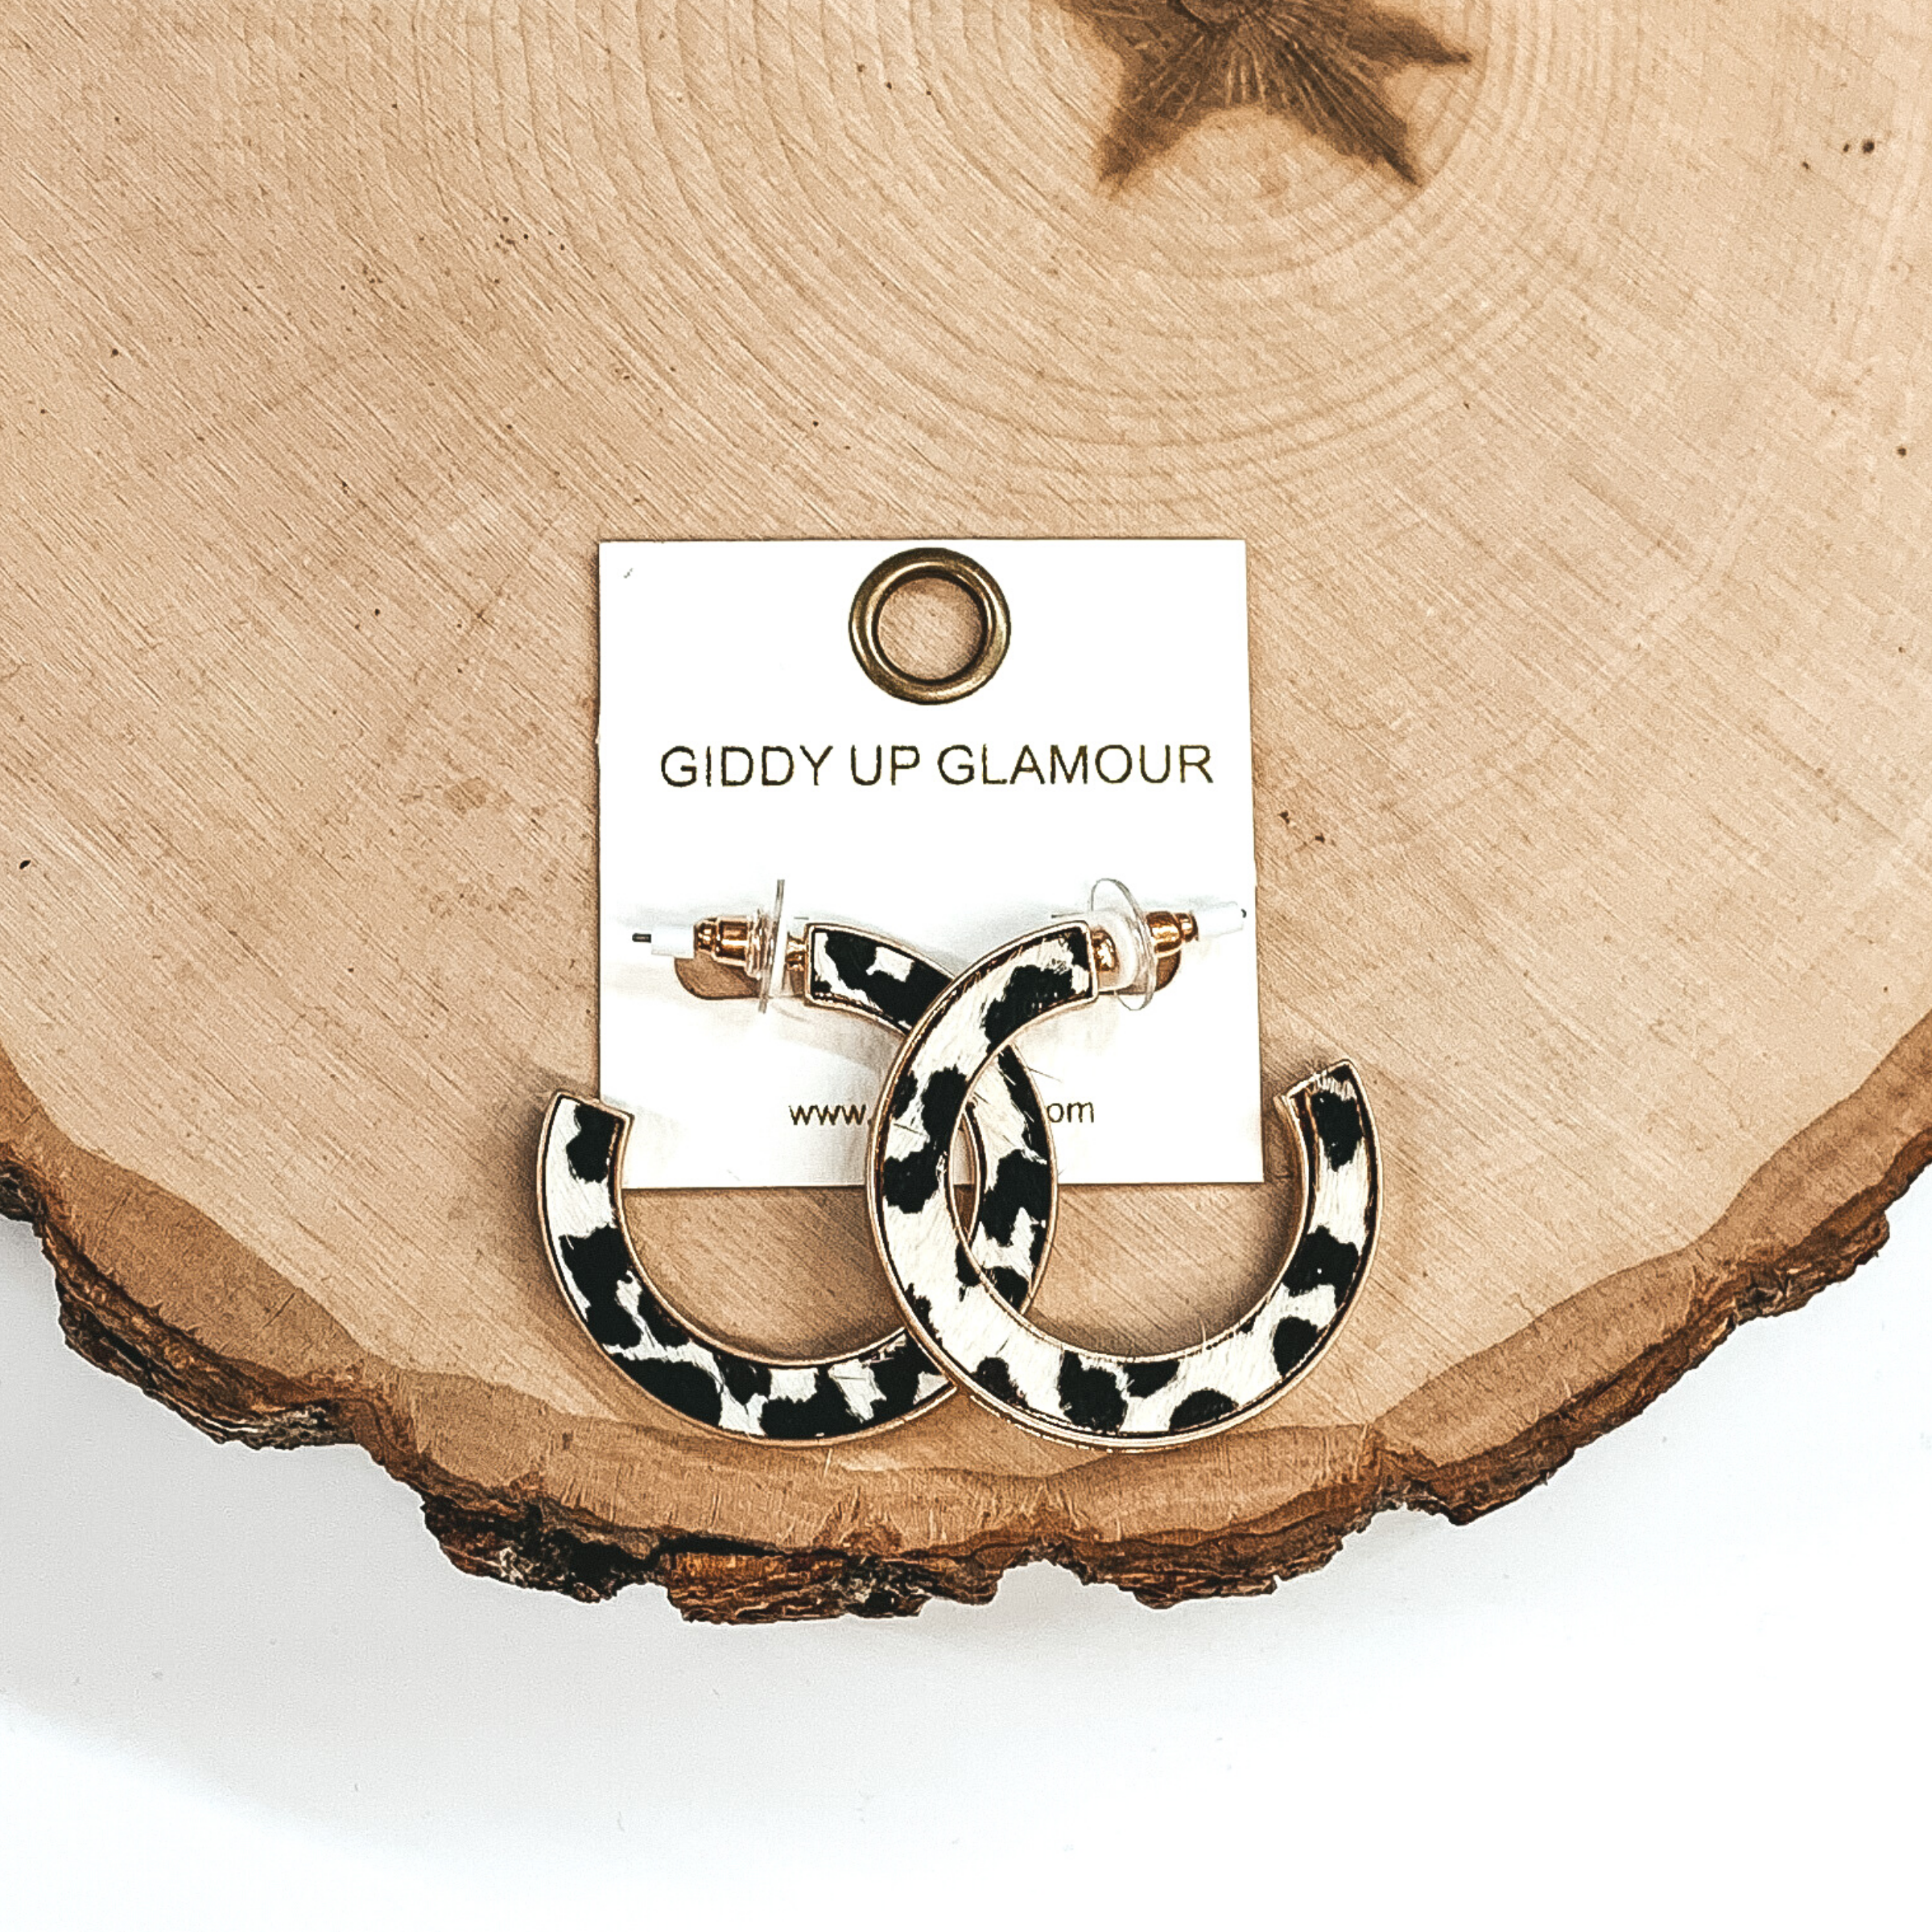 Gold hoops with white and black animal print inlay. These earrings are pictured laying on a piece of wood on a white background.